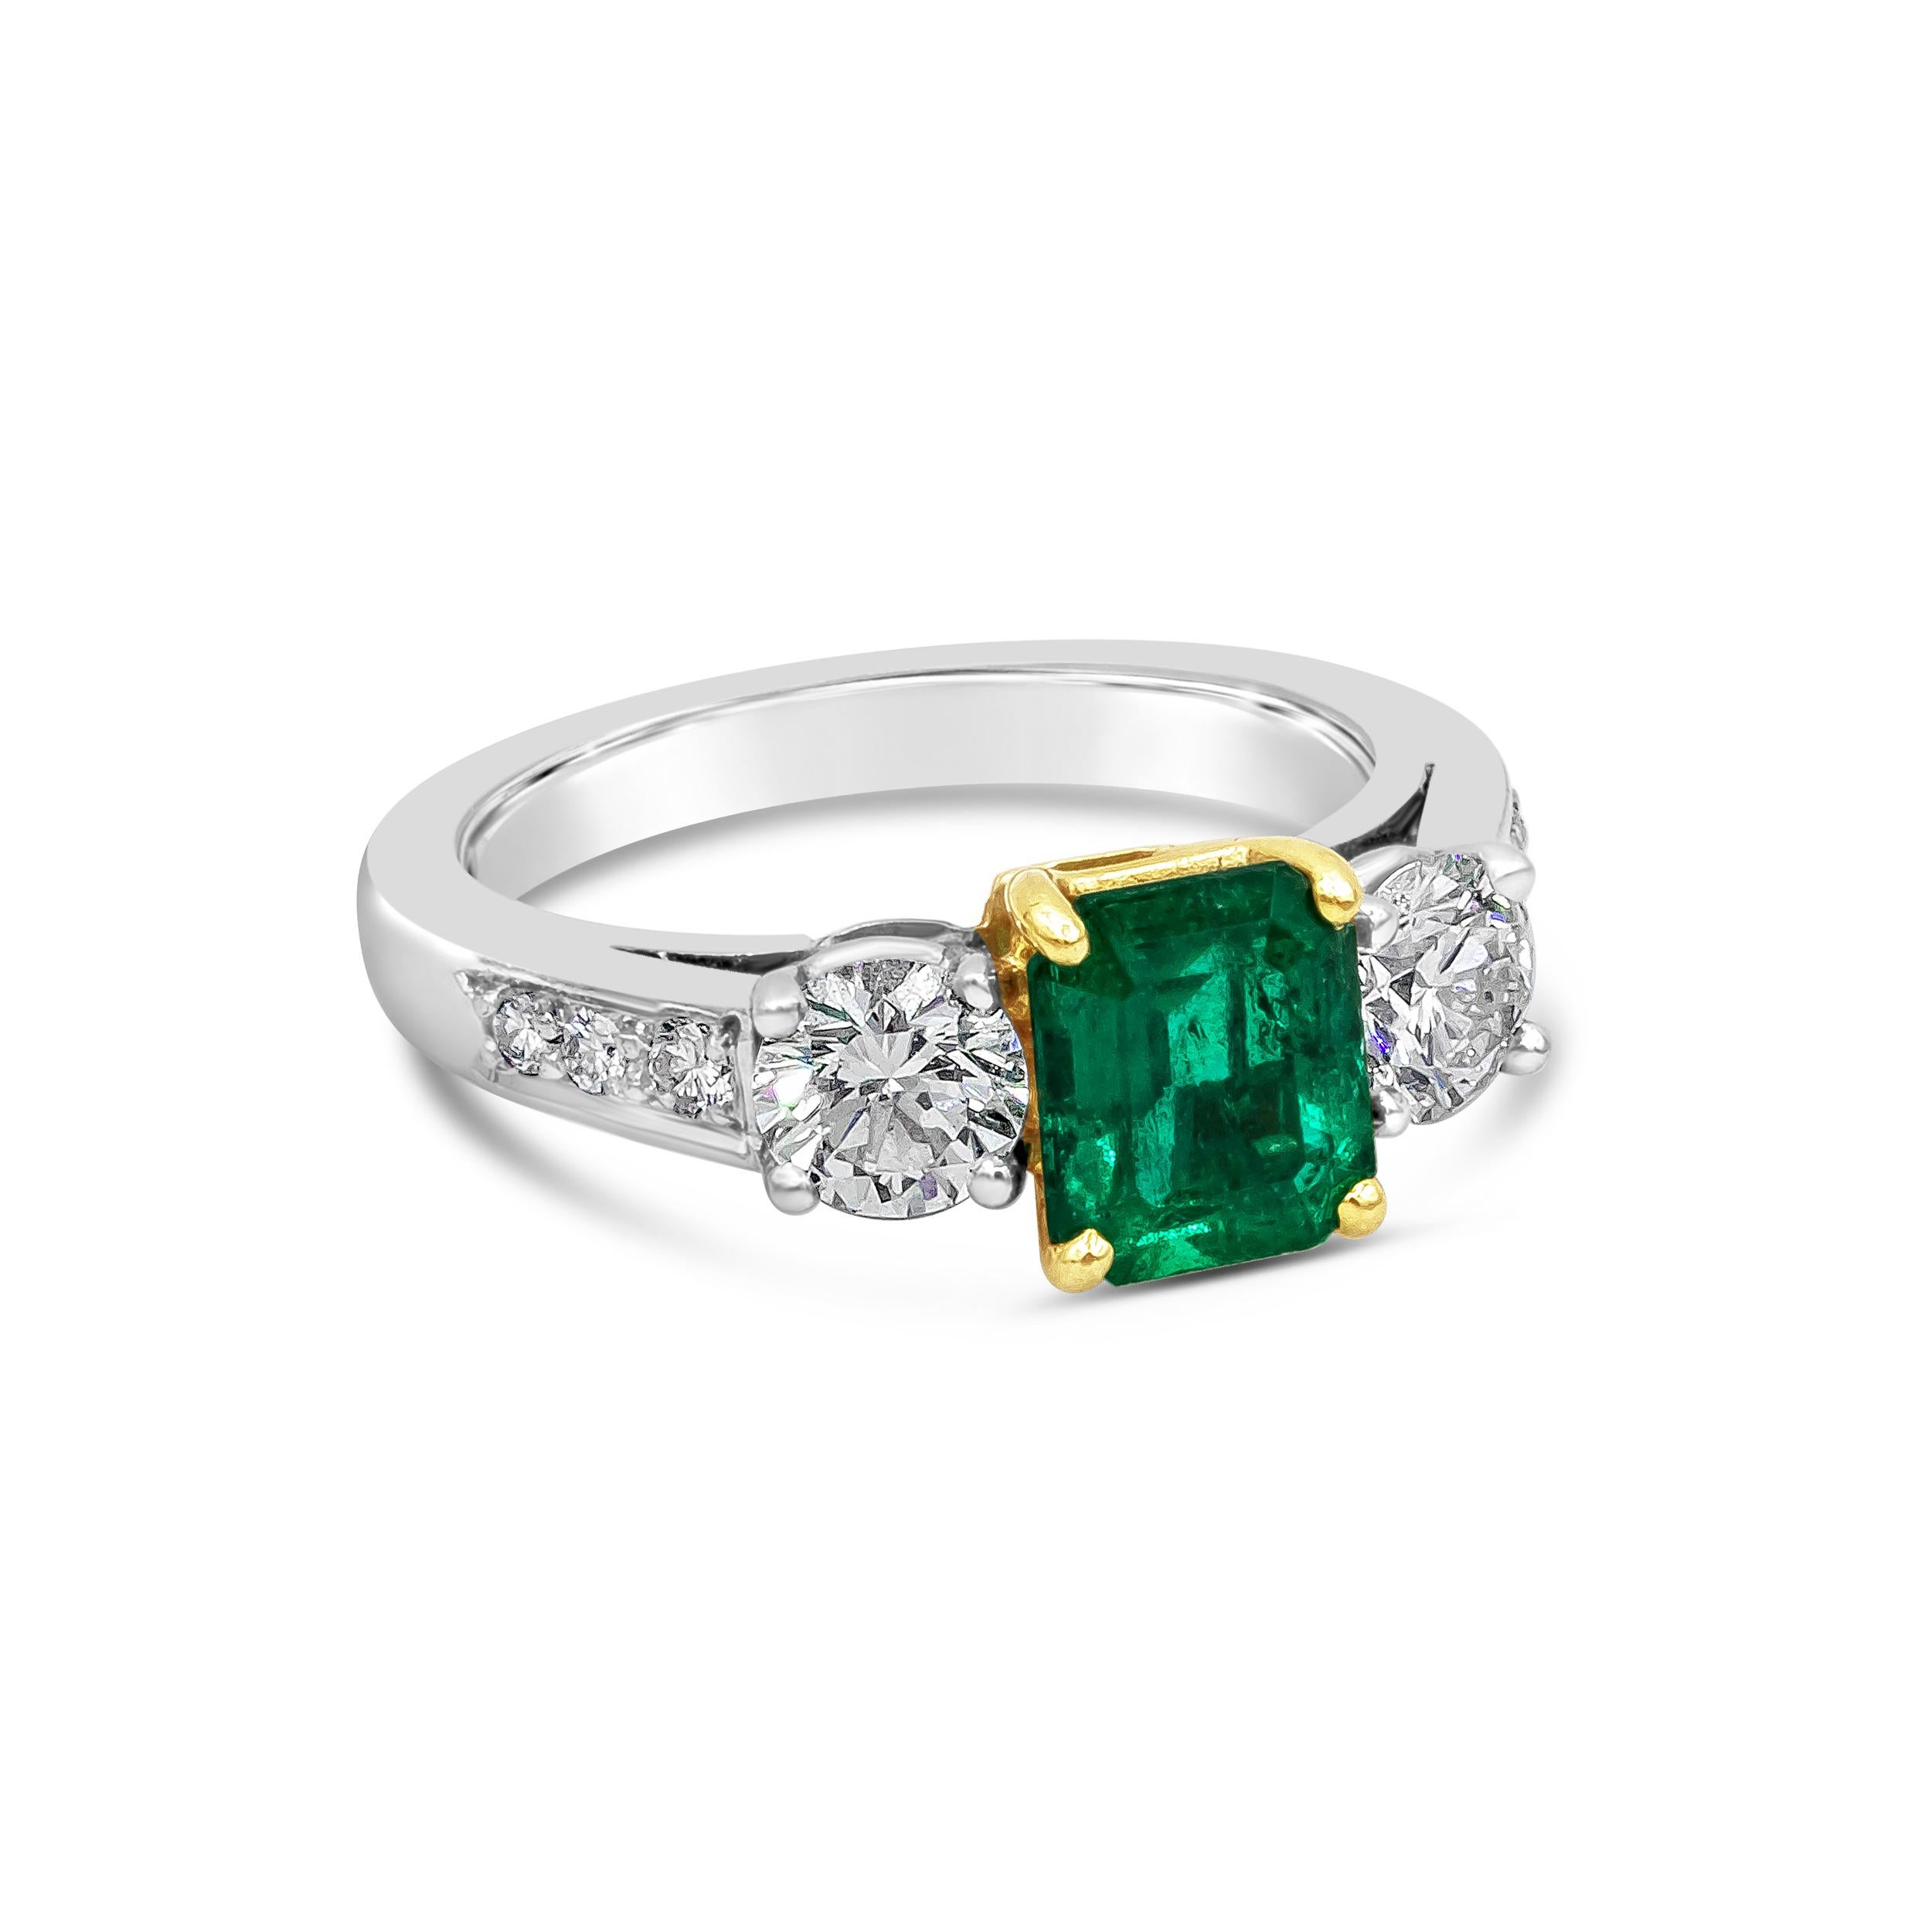 A color-rich three stone engagement ring showcasing a 1.27 carats green emerald, set in a classic four prong setting. Flanked by a round brilliant diamond on each side and set in a polished platinum band accented with round brilliant diamonds.